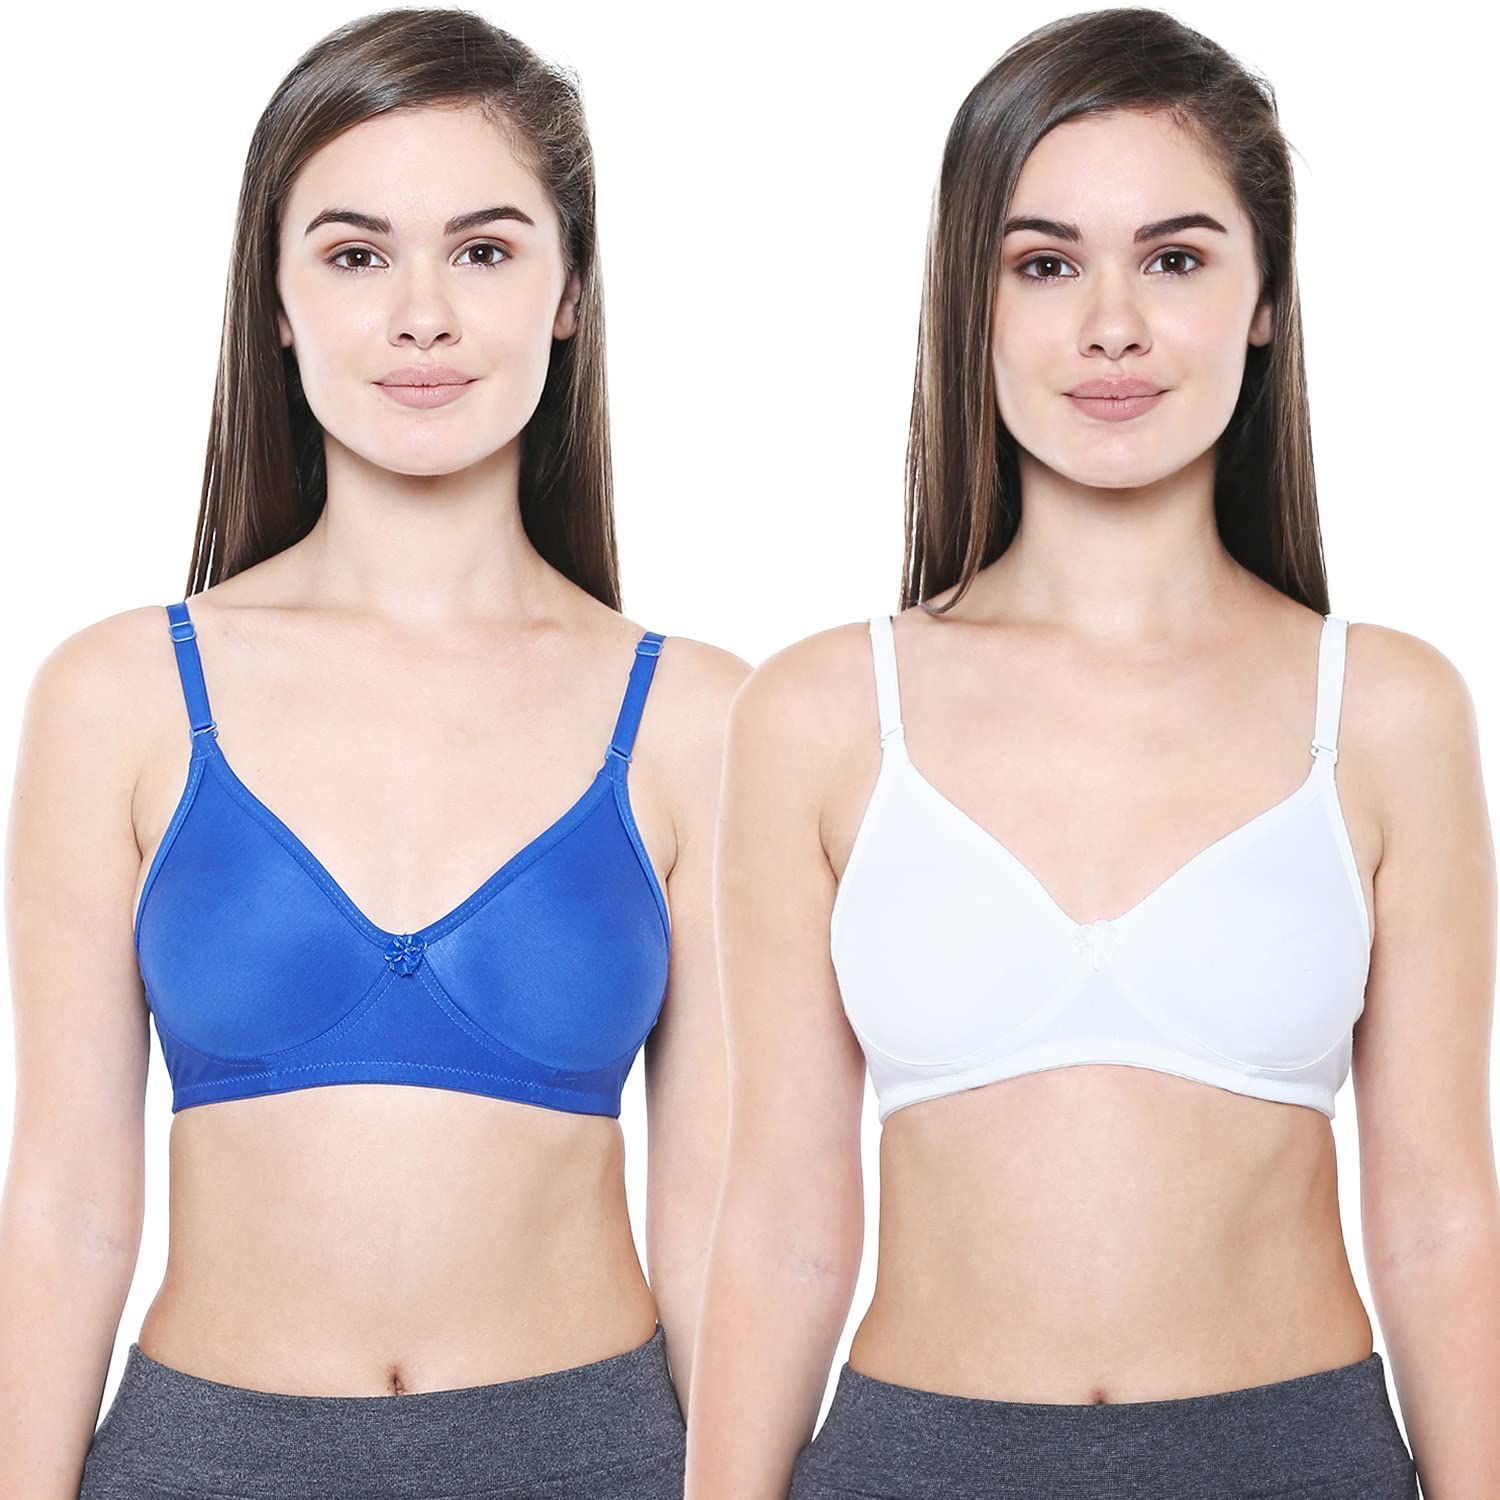 BODYCARE Pack of 2 Seamless Cup Bra in Royal Blue-White Color - E5554RBLW